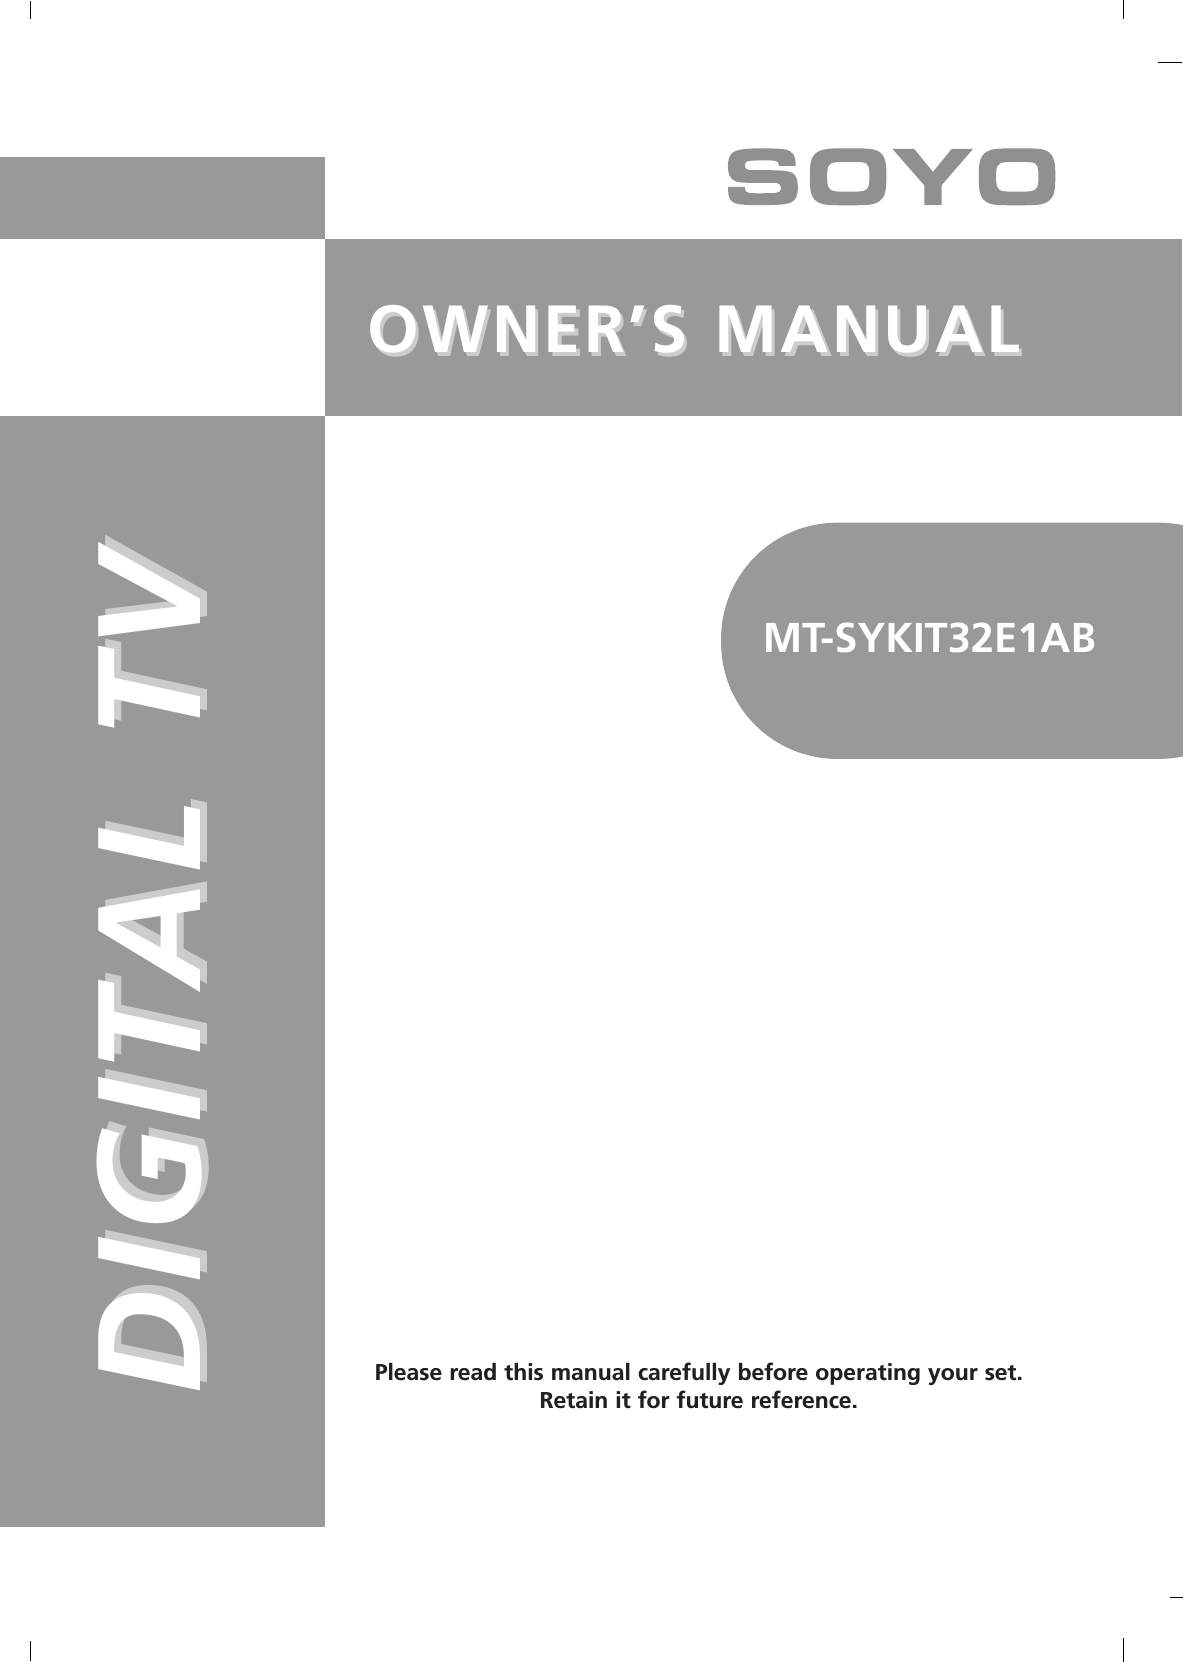 OWNER’S MANUALOWNER’S MANUALDIGITAL TVDIGITAL TVPlease read this manual carefully before operating your set.Retain it for future reference.MT-SYKIT32E1AB